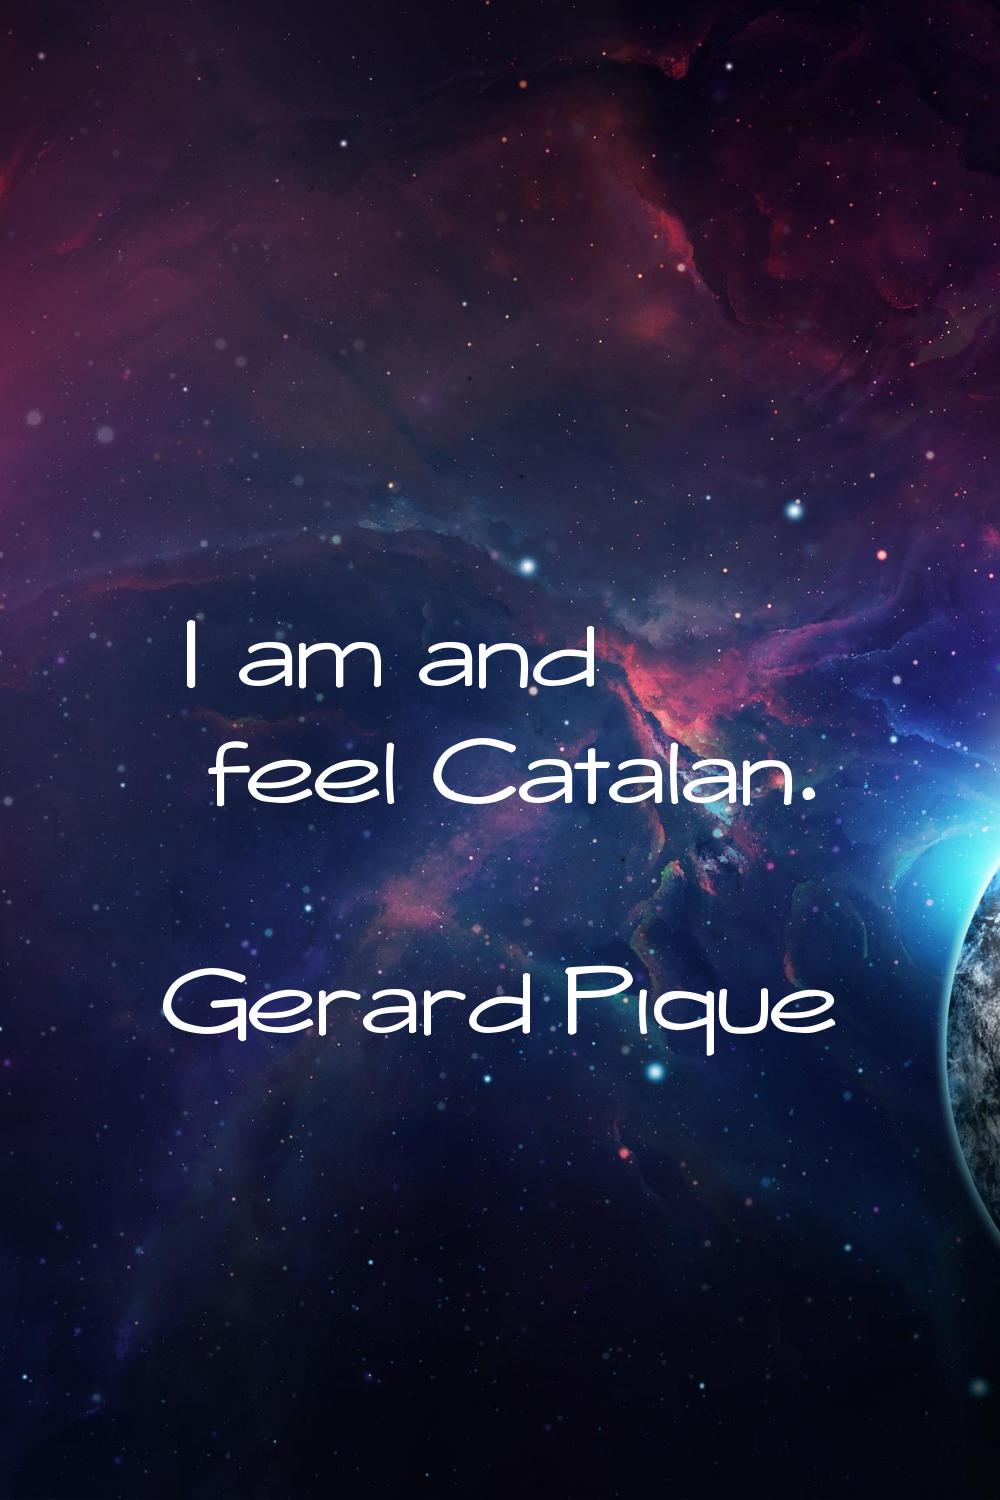 I am and feel Catalan.